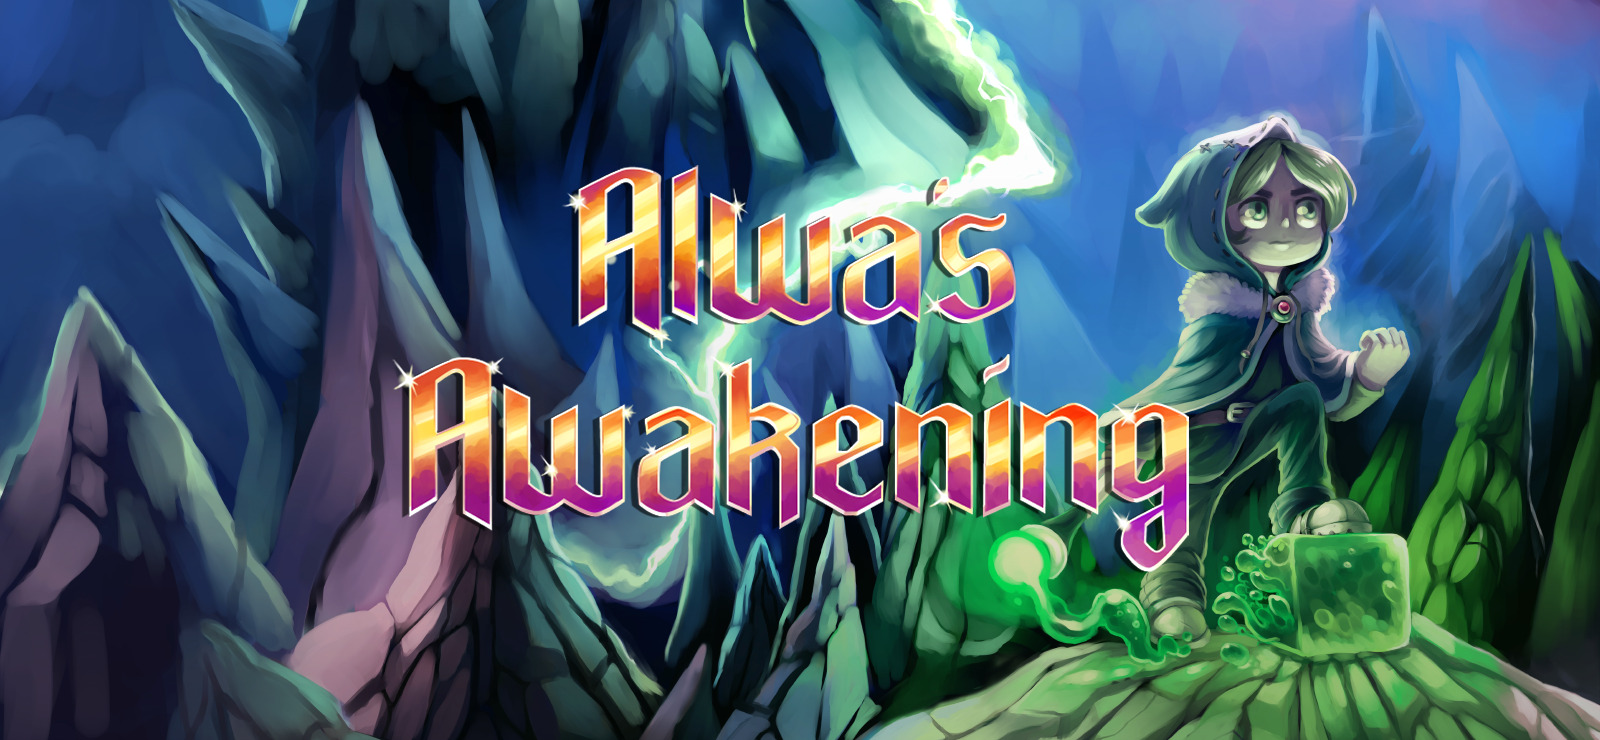   
 In Alwa's Awakening you play as Zoe, a heroine sent from another world to bring peace